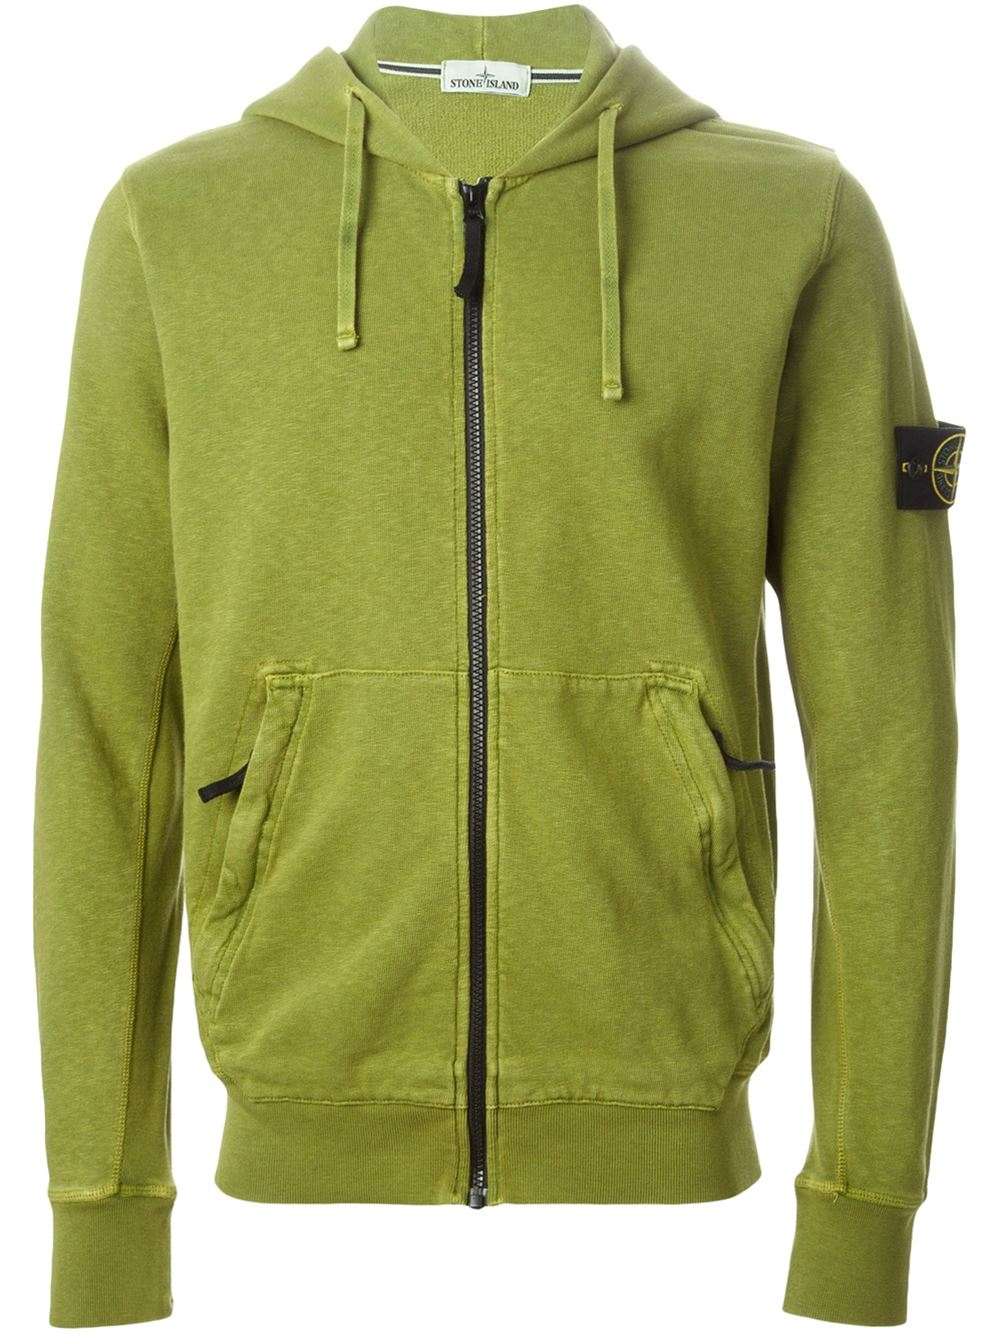 Stone Island Zip Hoodie Green Outlet, SAVE 38% - eagleflair.com